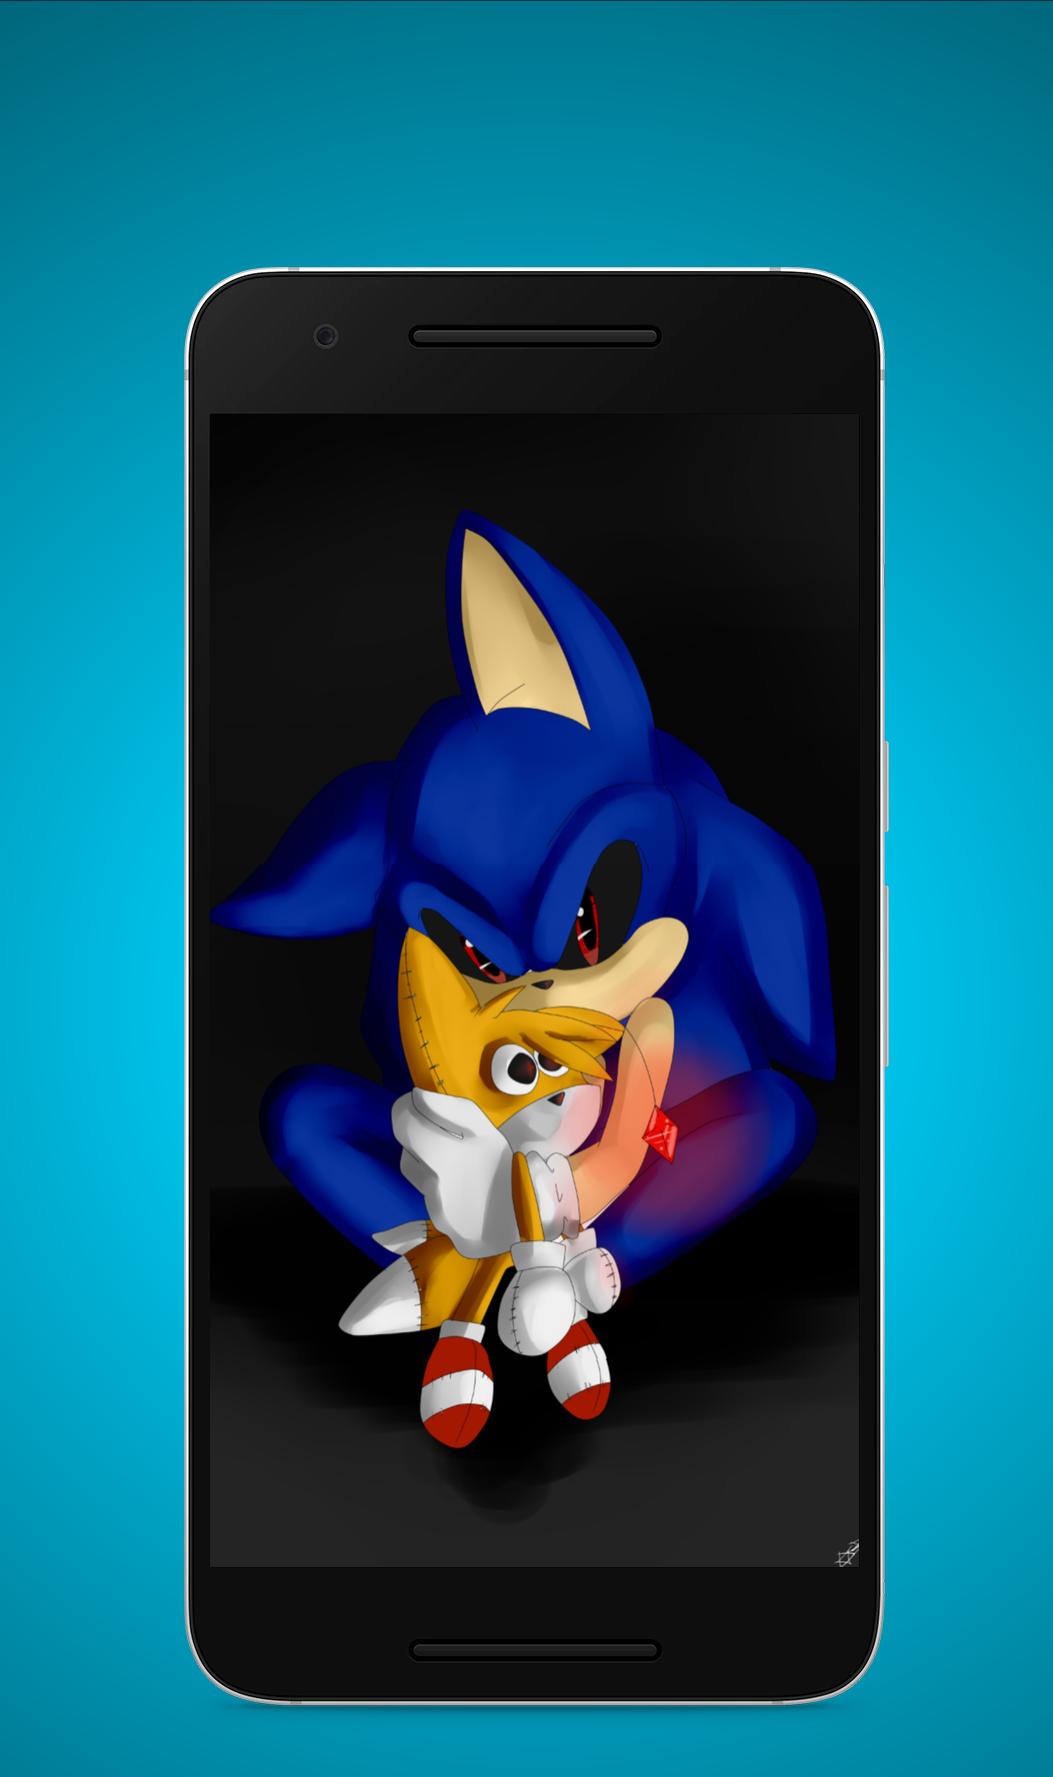 Sonic'exe wallpapers 2020 APK for Android Download